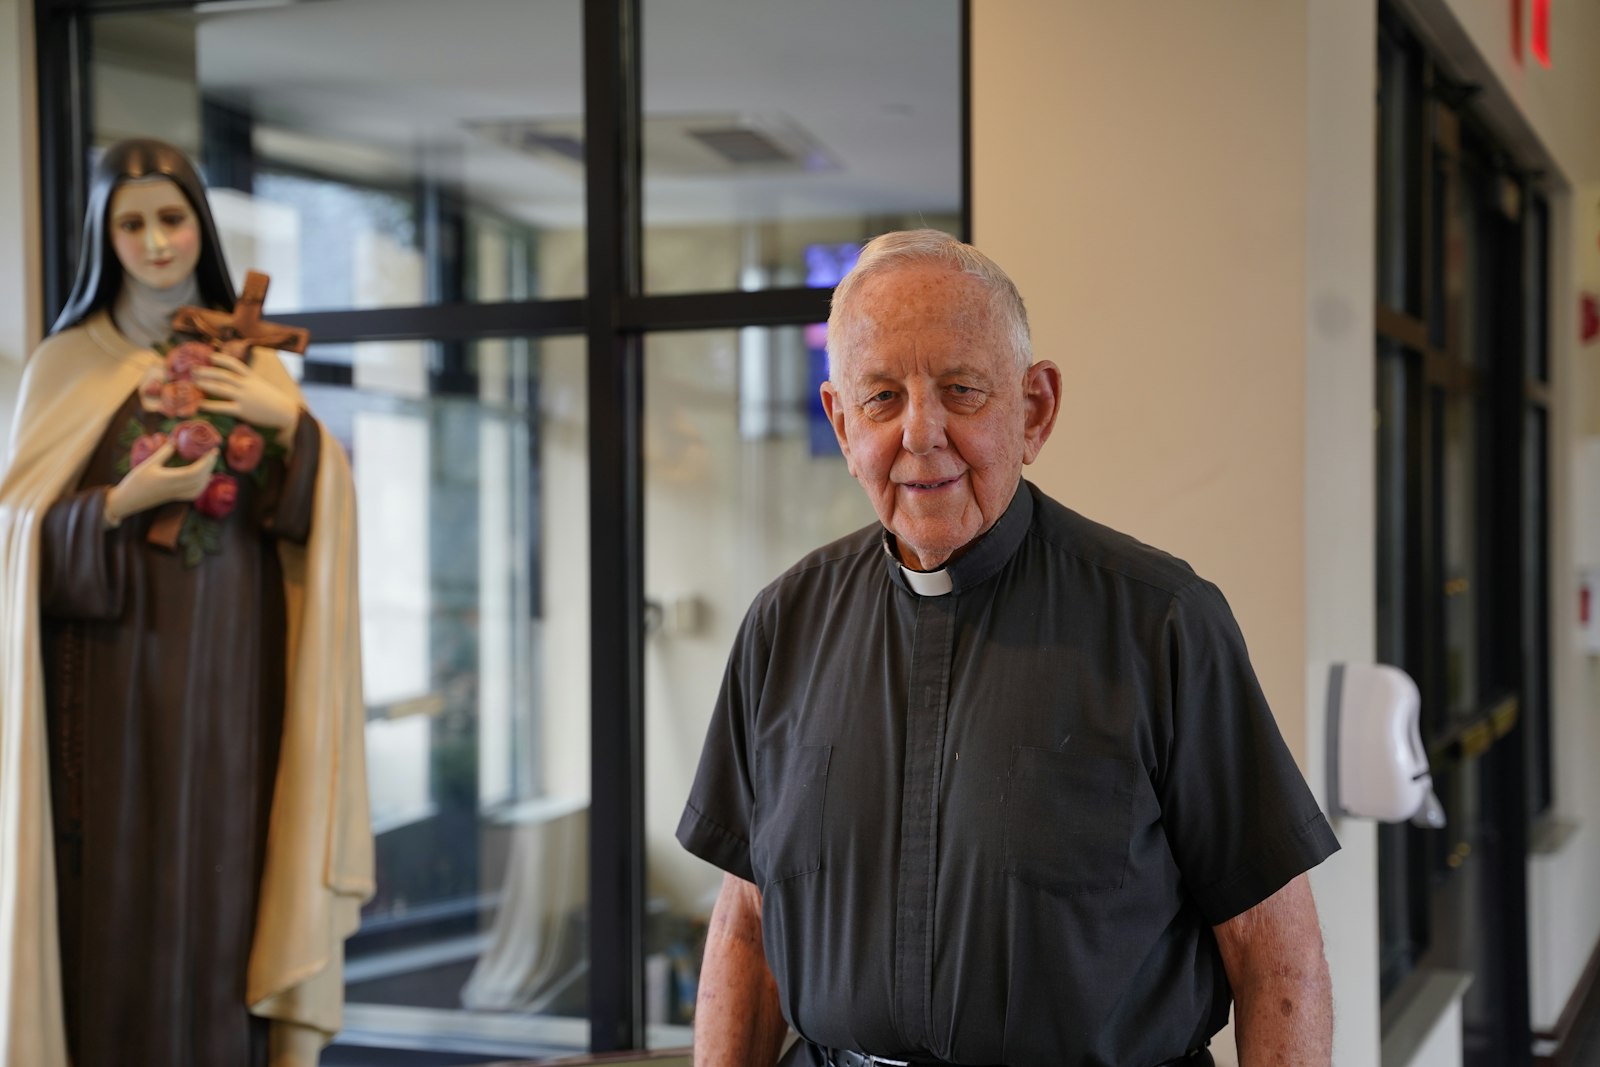 Fr. Joseph Lang, 87, of the National Shrine of the Little Flower Basilica in Royal Oak, didn't become a priest until he was 70. Fr. Lang enjoyed a long teaching career and a family, but when his wife of 32 years died in 1996, he felt the urge to return to a calling he felt early on in life.